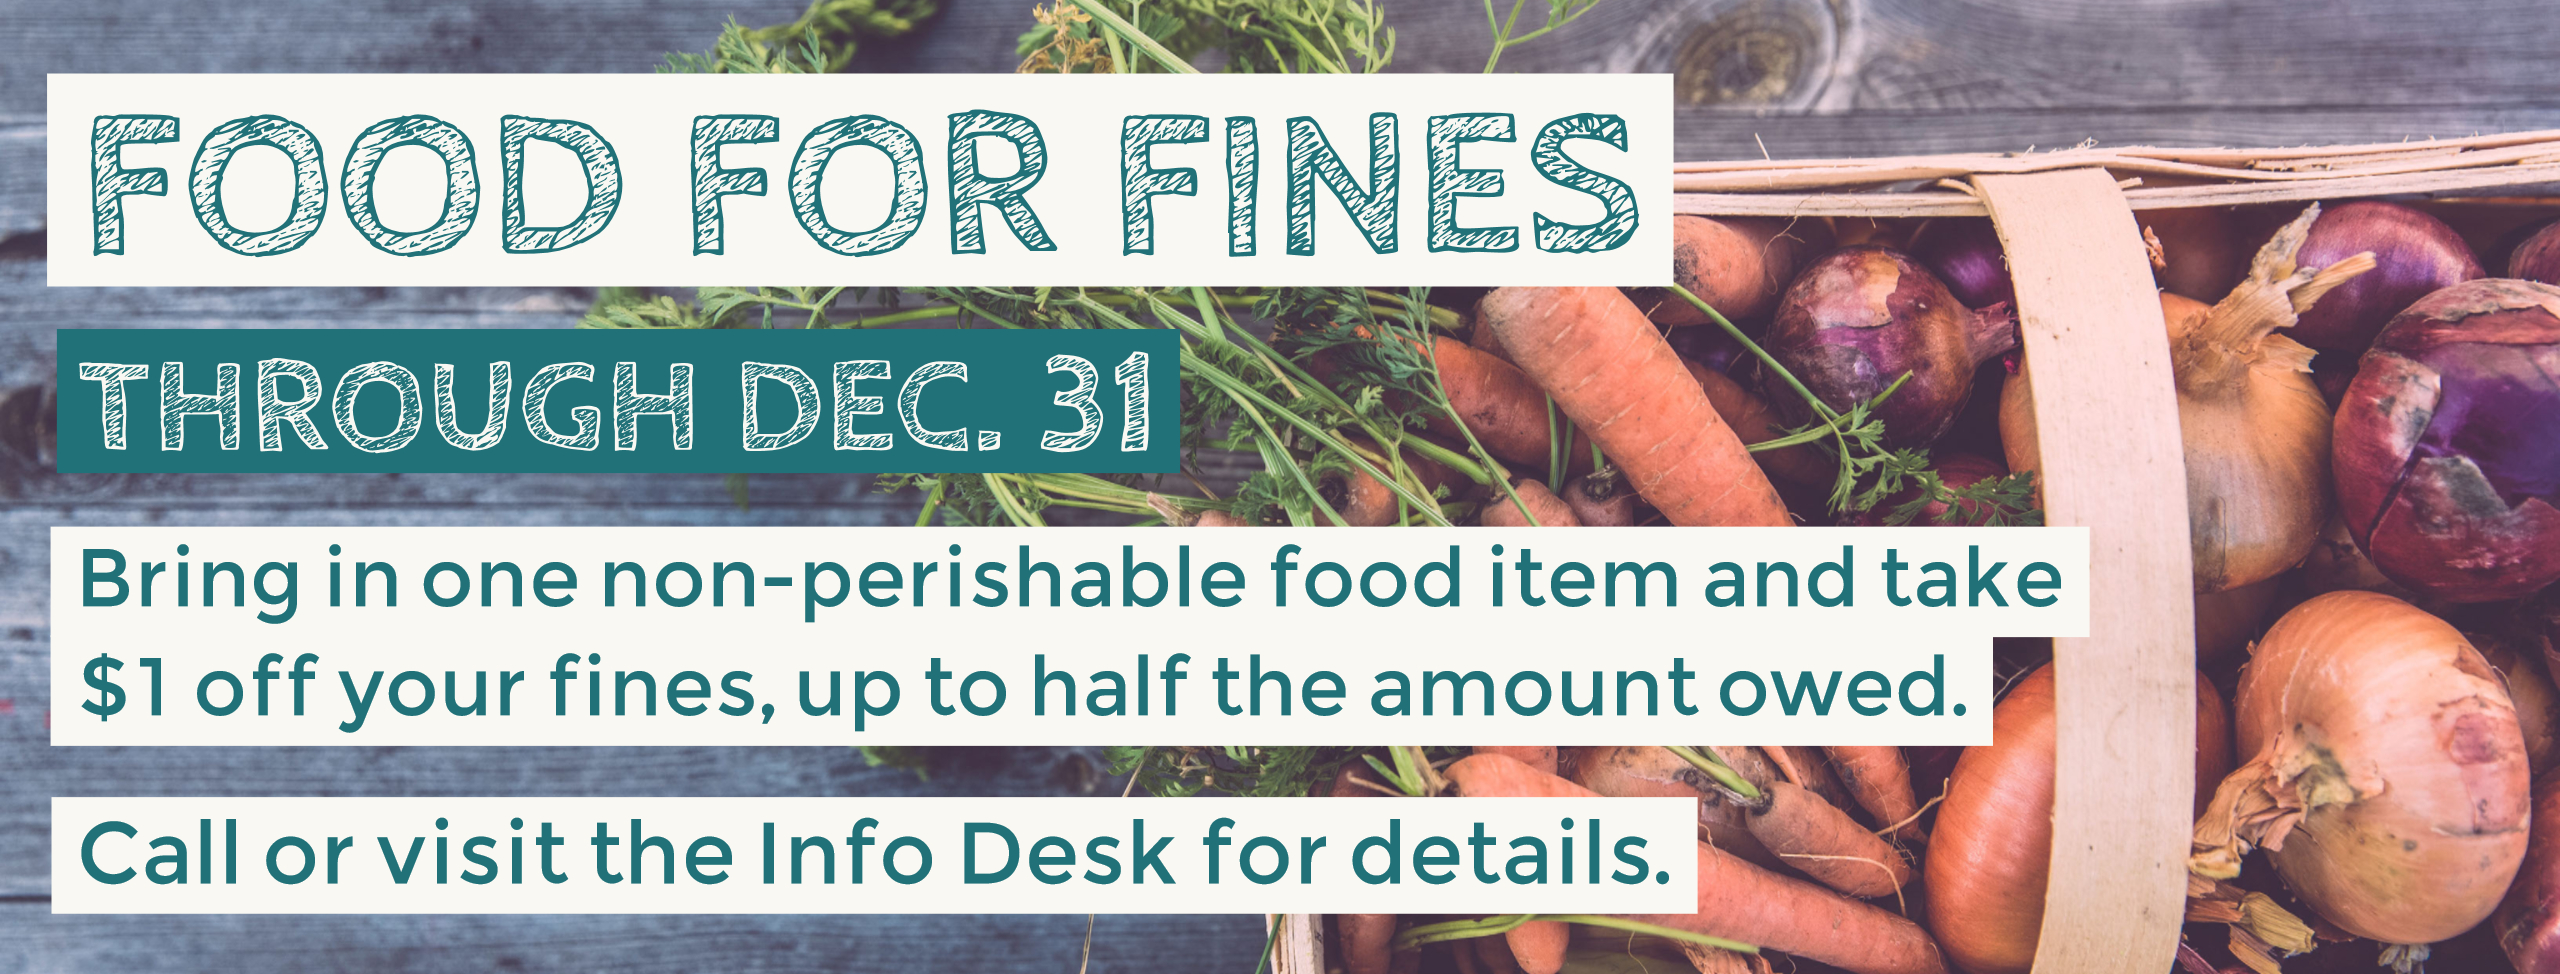 Food for Fines cover photo.jpg